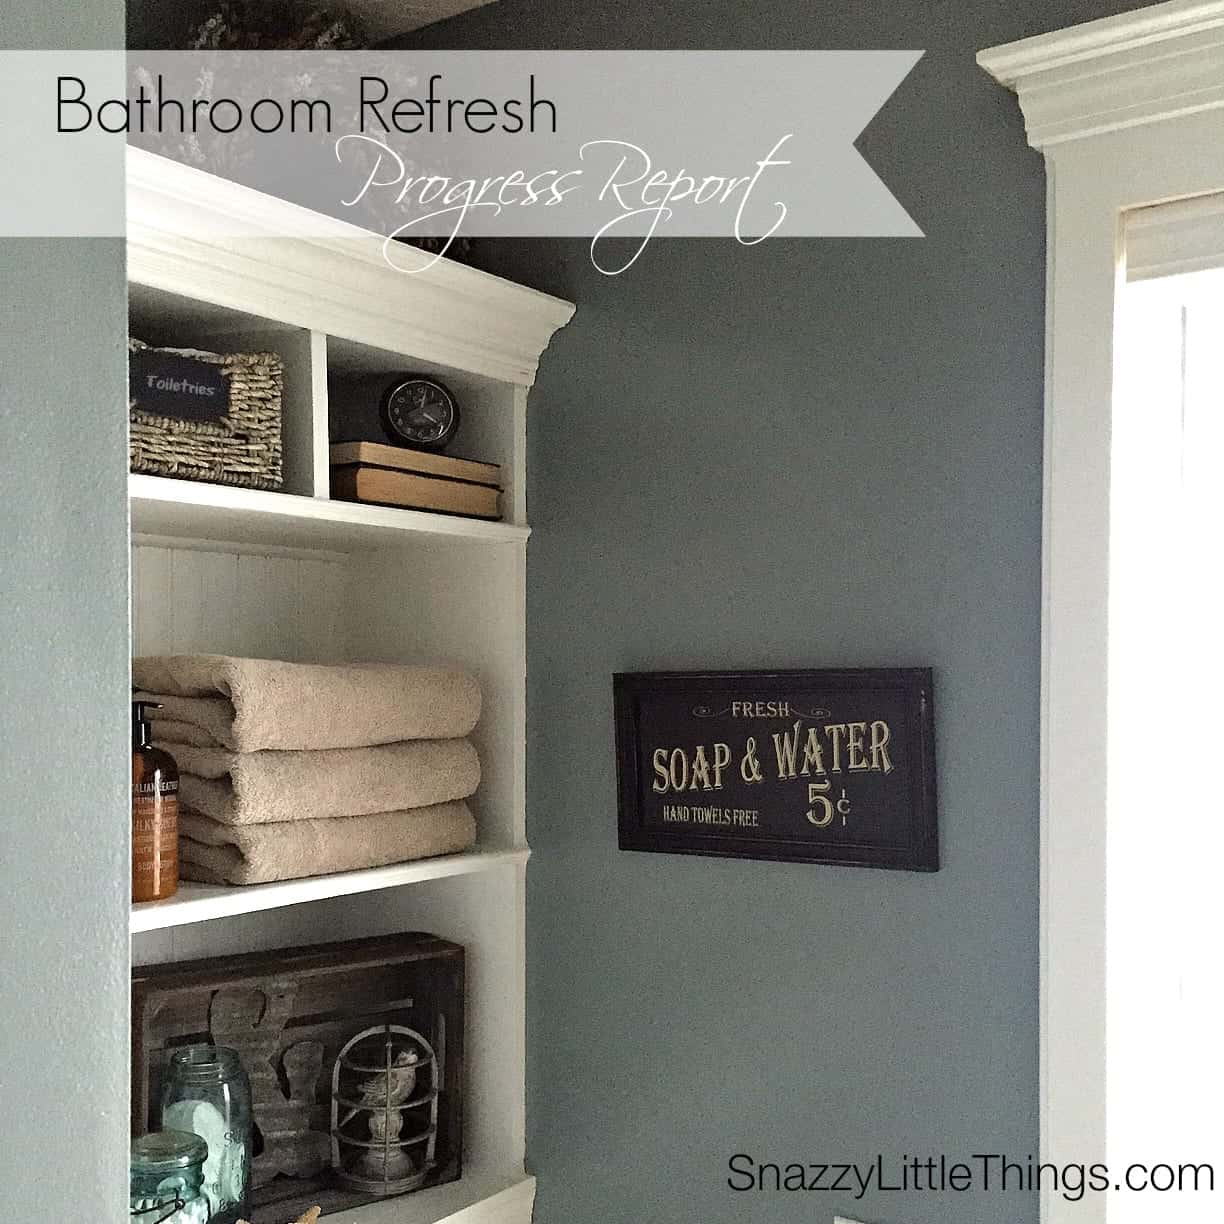 Bathroom Remodel: new paint + built-ins + Levolor blinds - by SnazzyLittleThings.com